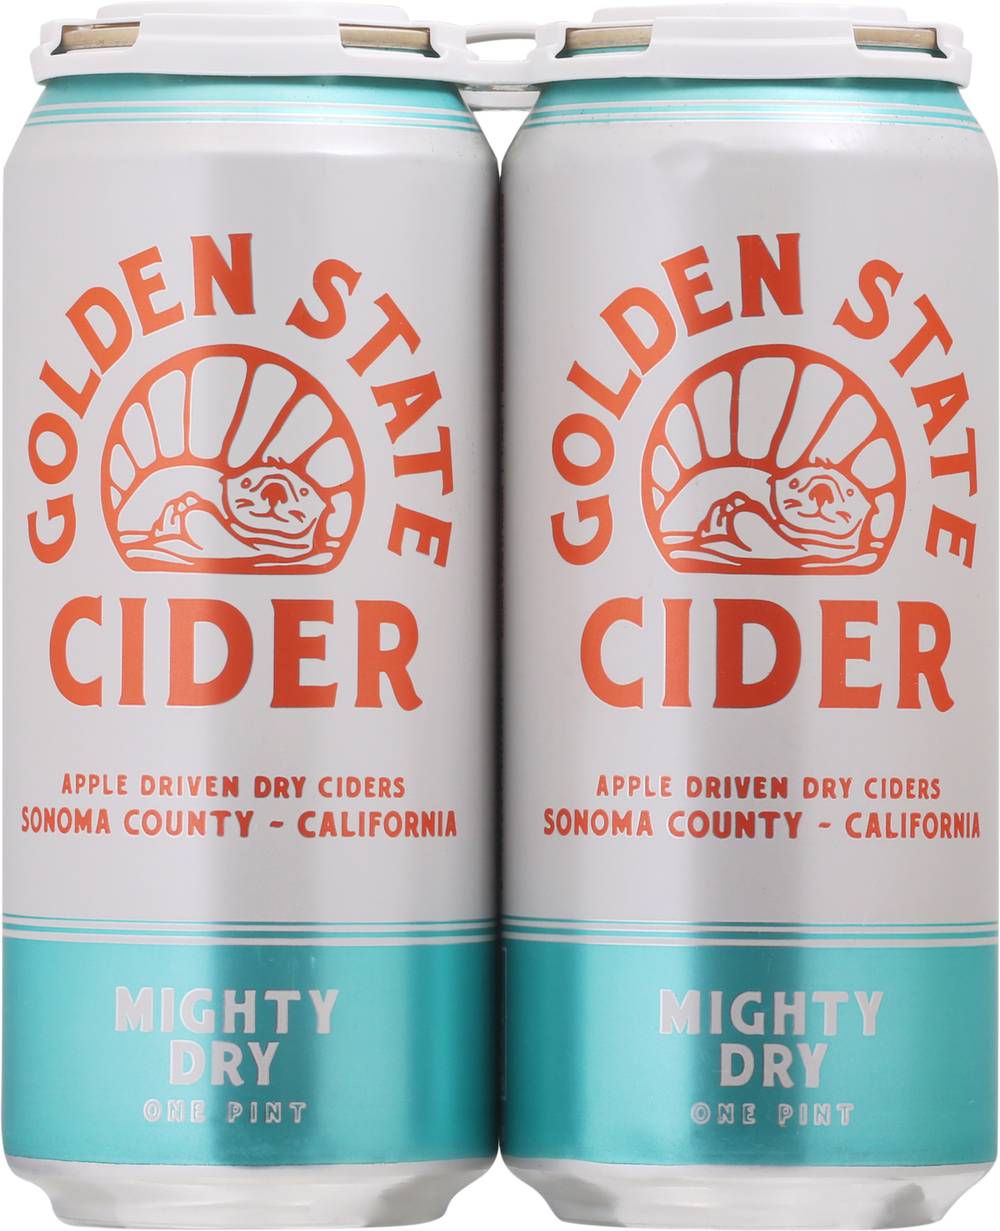 Golden State Cider Mighty Dry Apple Driven Dry (4 pack, 16 fl oz)